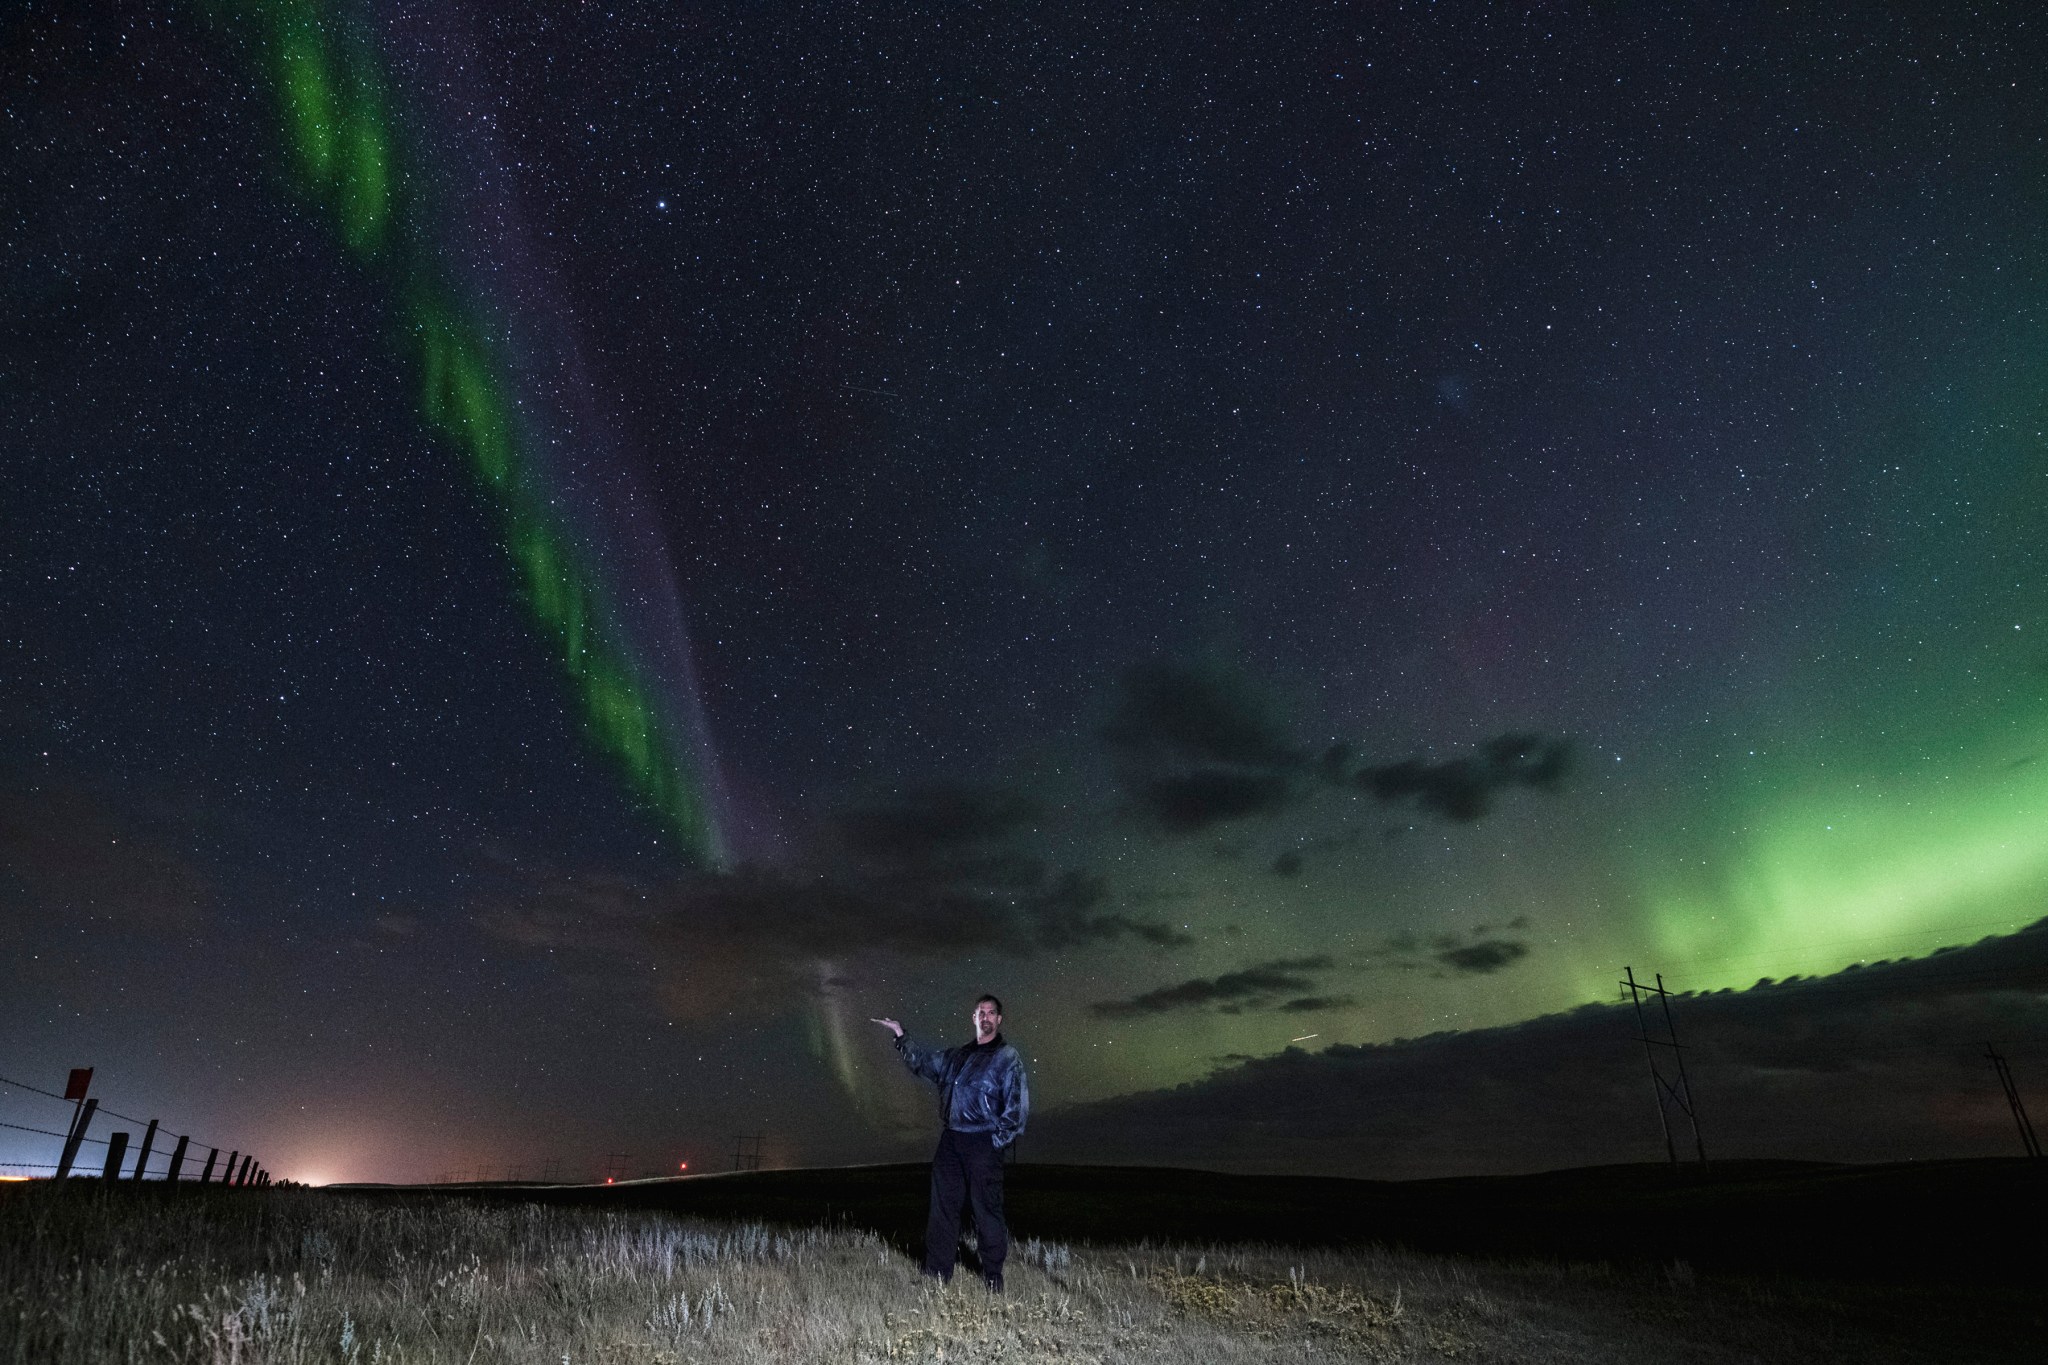 Notanee Bourassa stands in a field under the night sky with a purple and green aurora structure on the left and a green glow in the distance on the right.